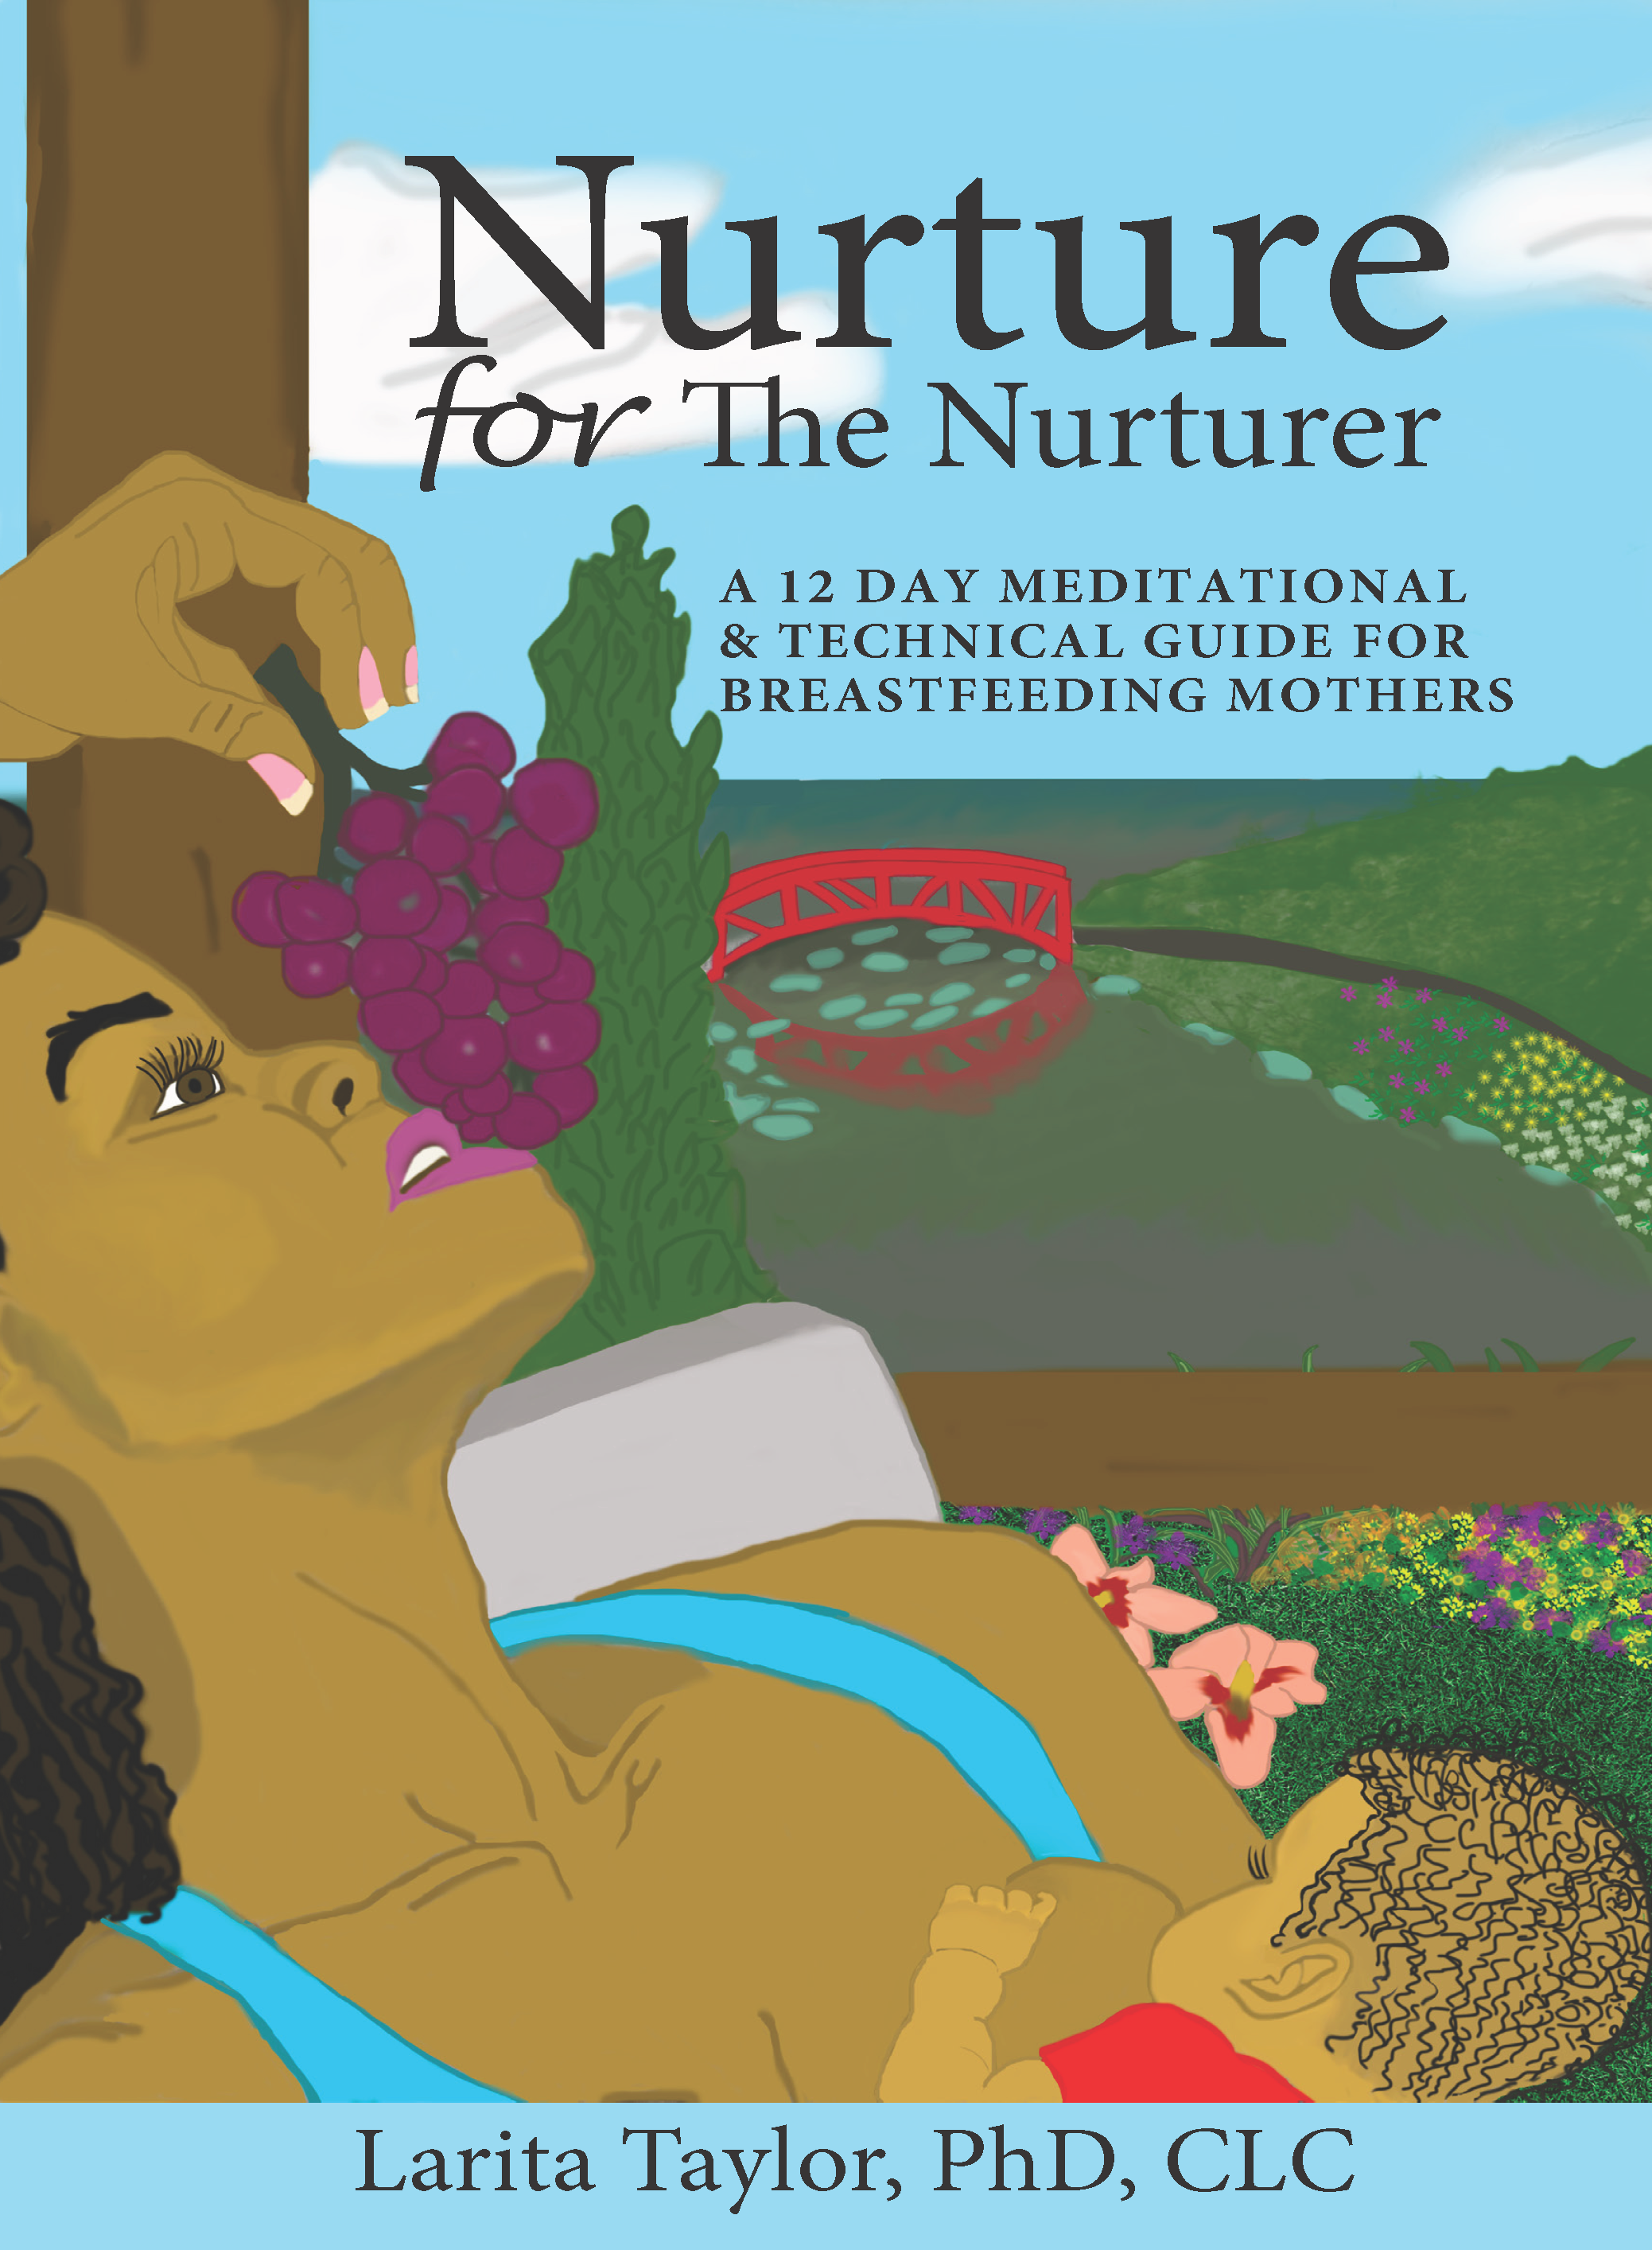 “Nurture for the Nurturer: A 12 Day Meditational & Technical Guide for Breastfeeding Mothers" by Memphis author Dr. Larita Taylor